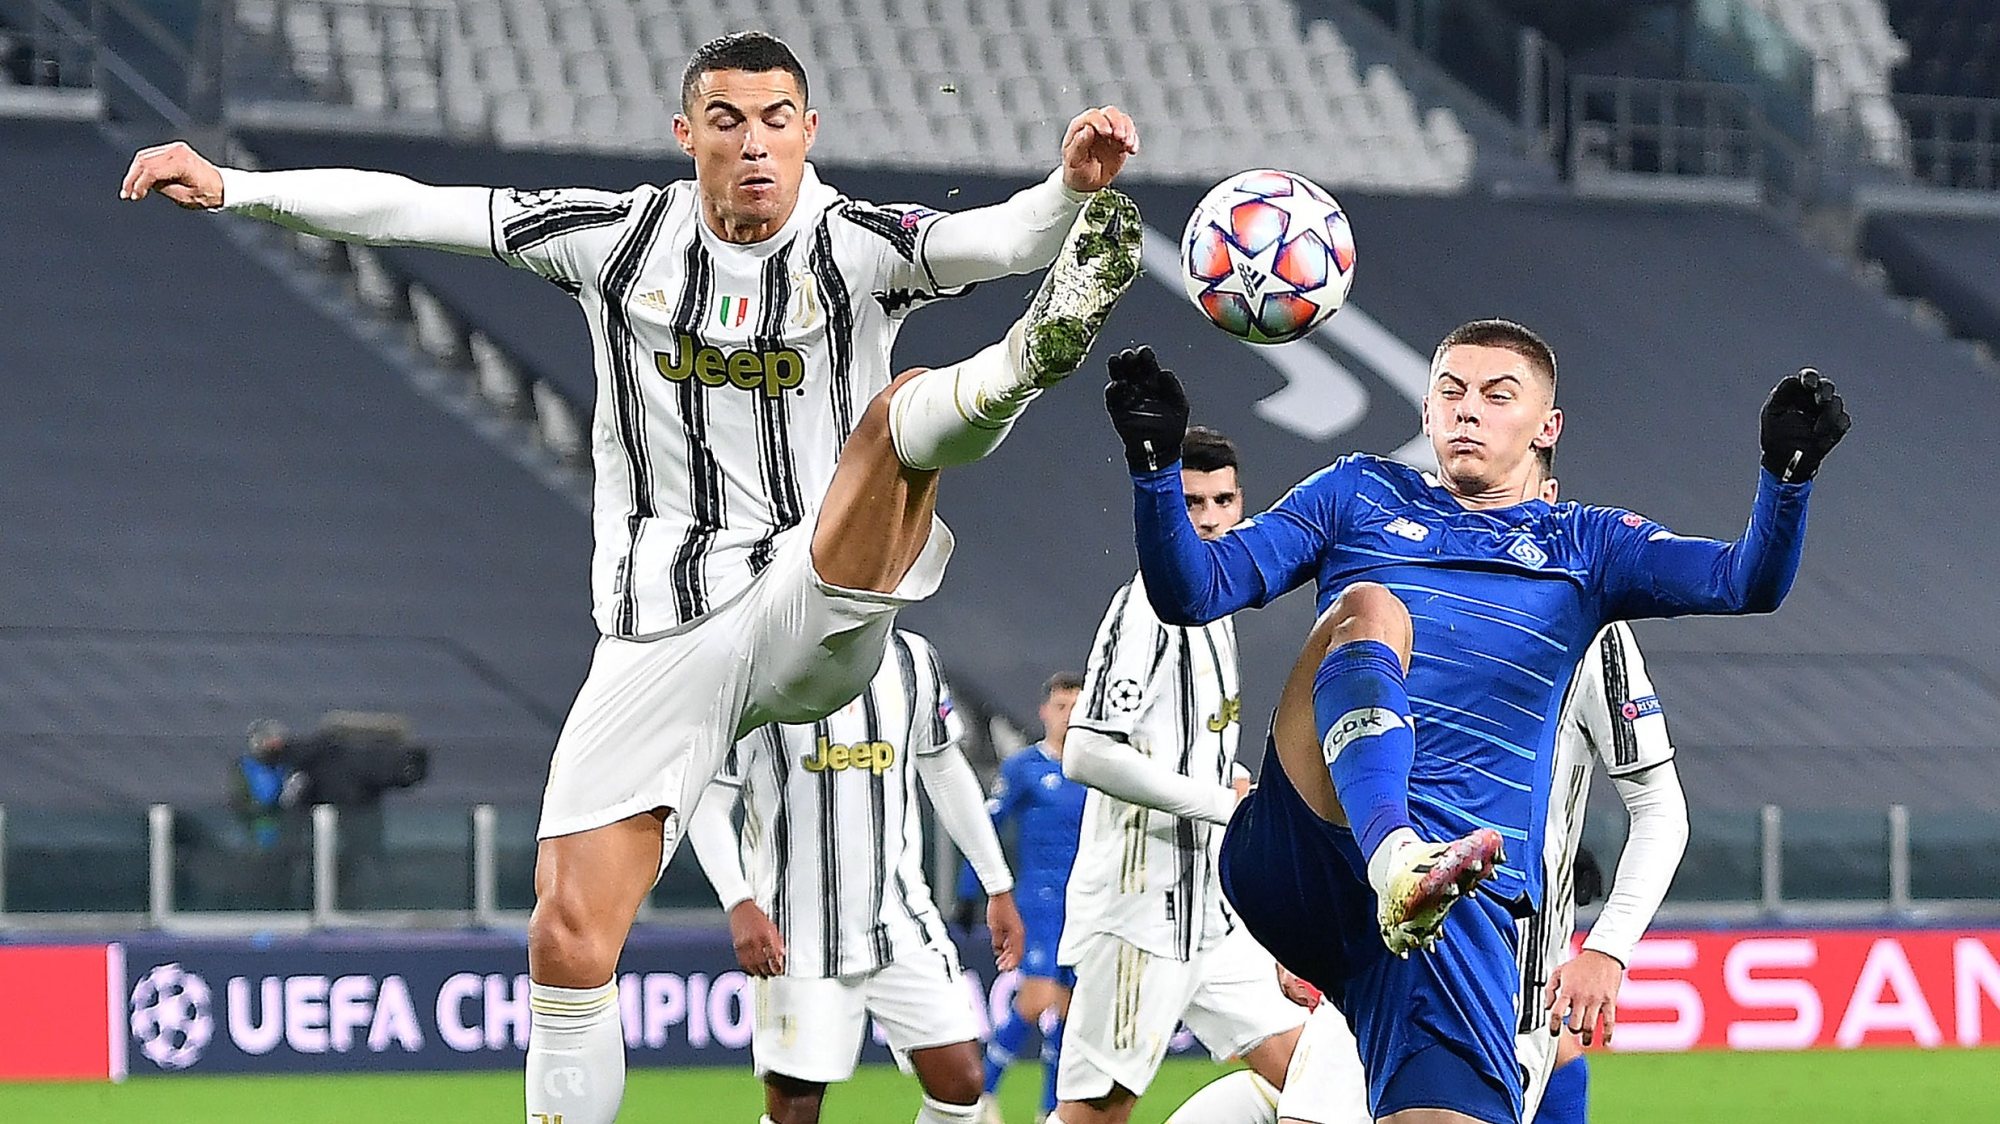 epa08858028 Juventusâ€™ Cristiano Ronaldo(L) in action during the UEFA Champions League Group G soccer match between Juventus FC vs FK Dynamo Kyiv at the Allianz Stadium in Turin, Italy, 2 December 2020.  EPA/ALESSANDRO DI MARCO